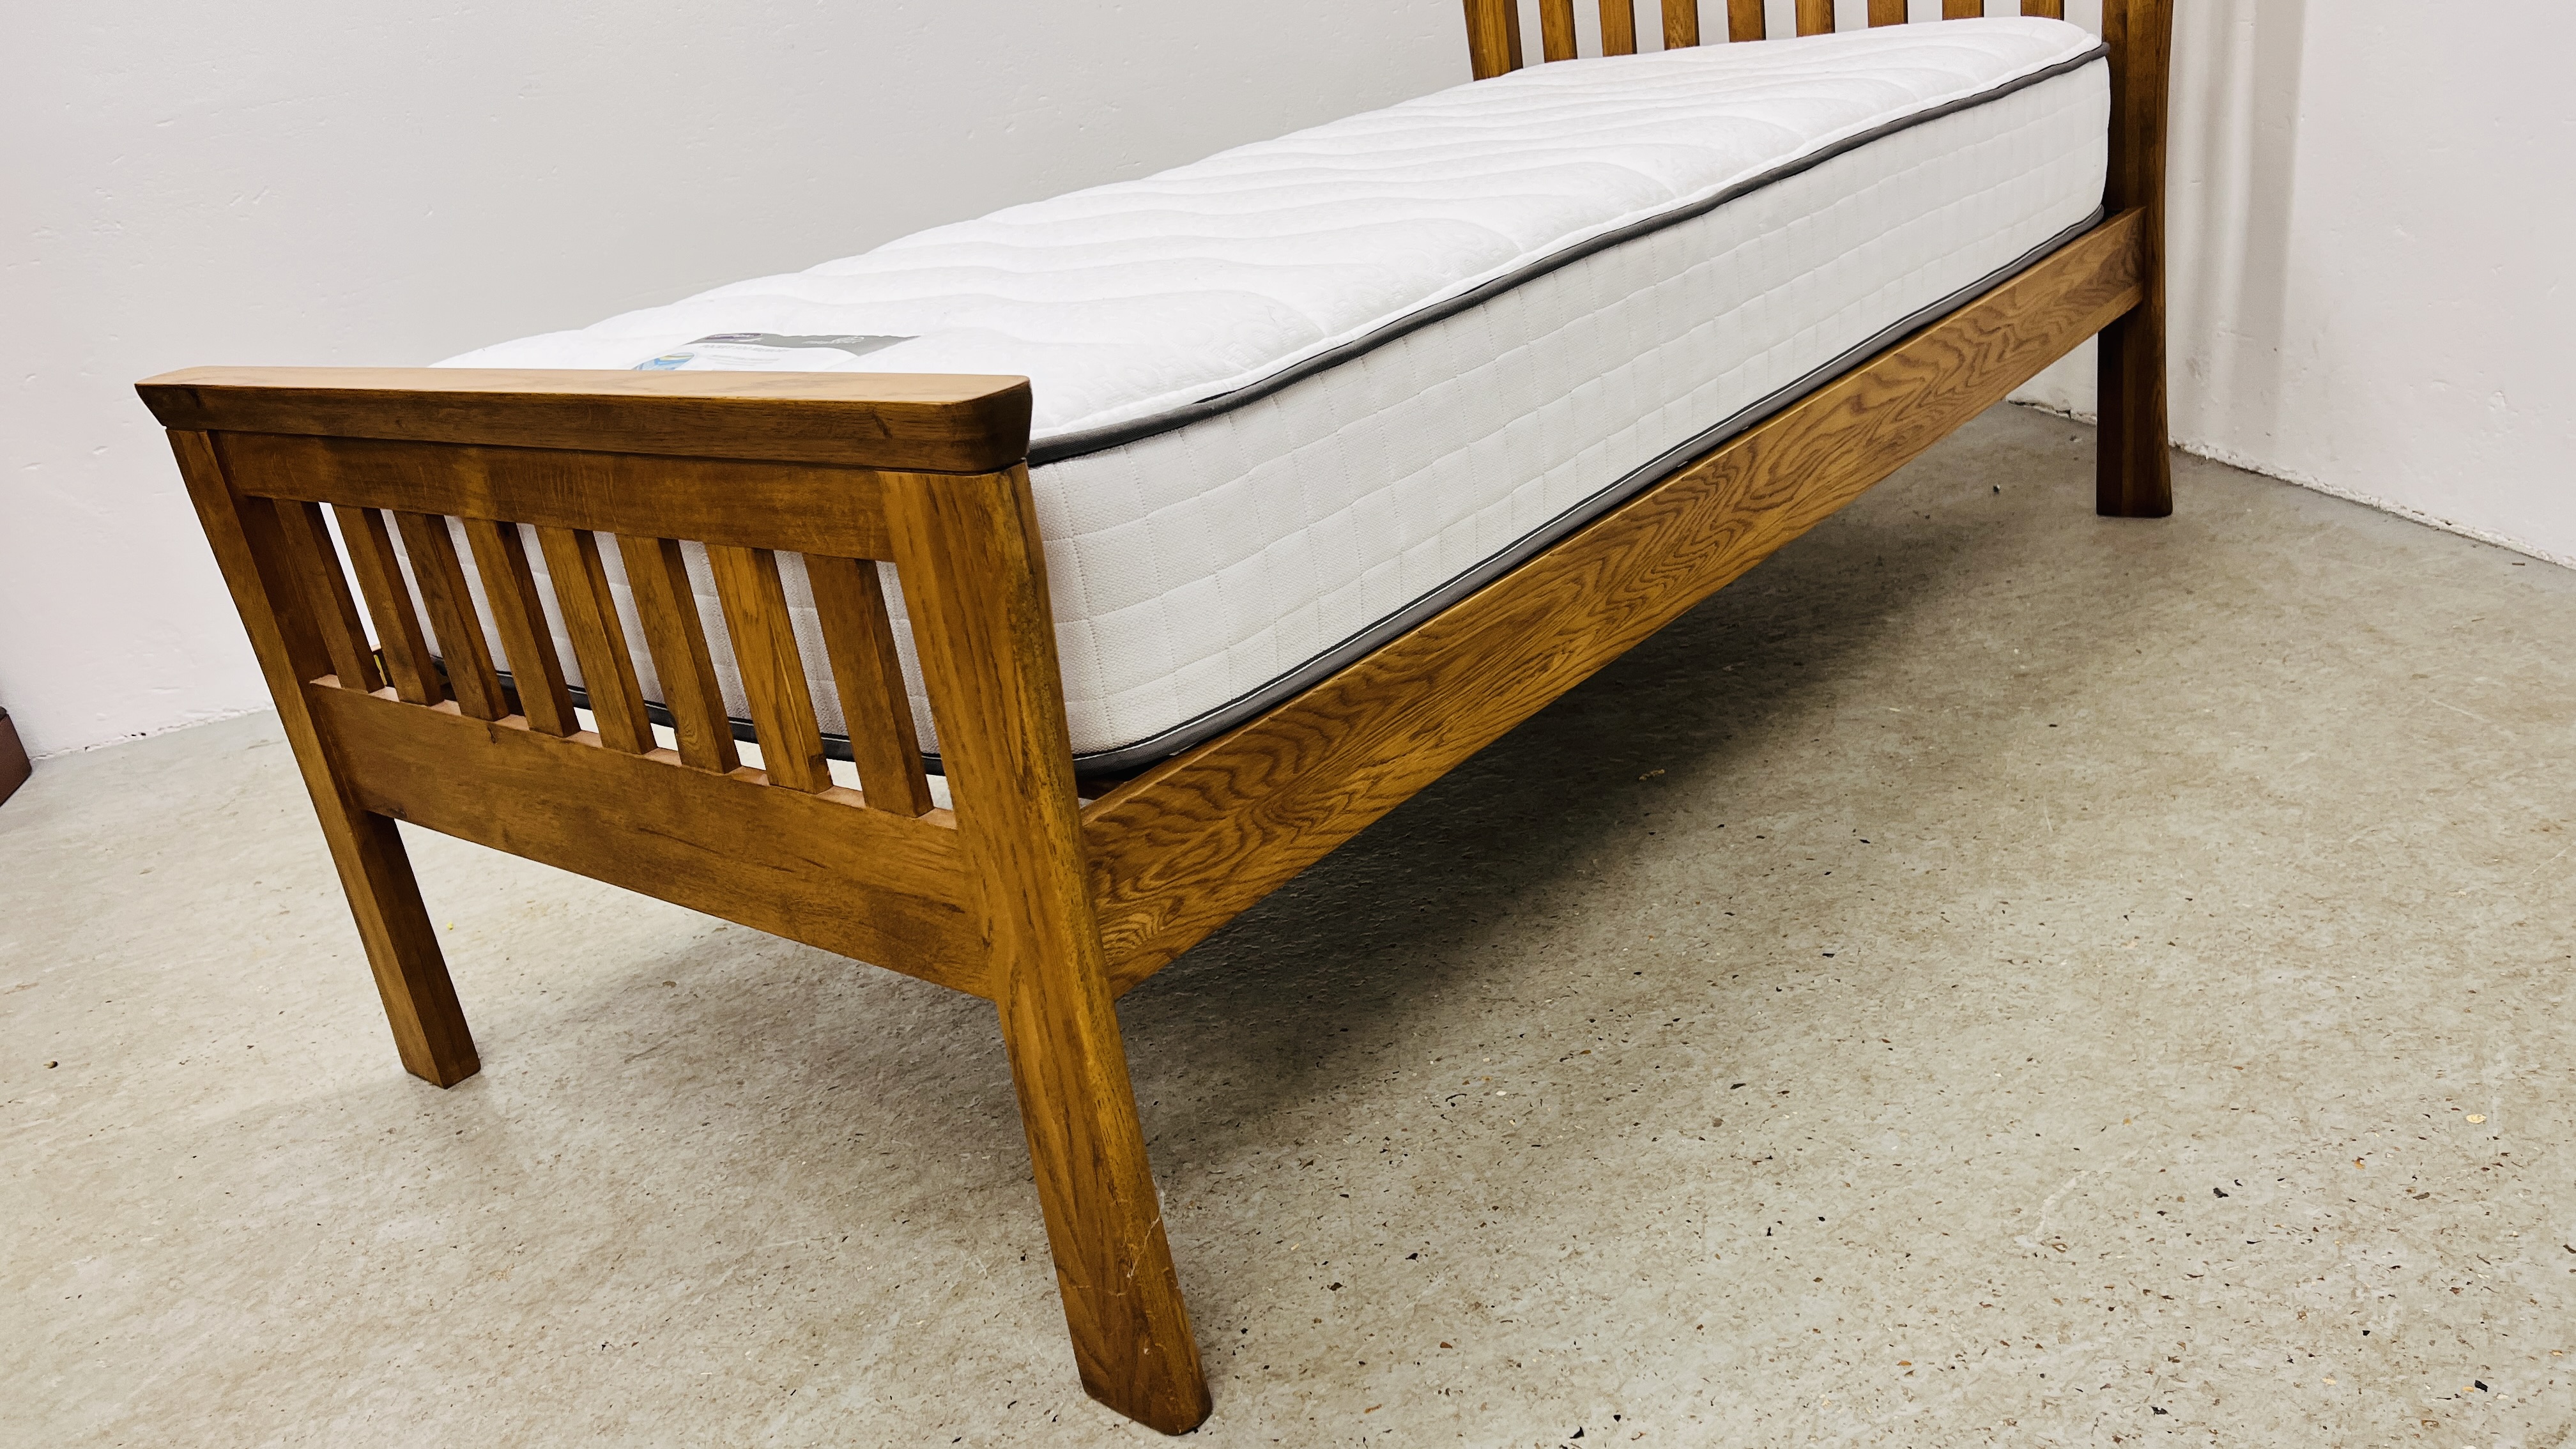 A GOOD QUALITY SOLID OAK SINGLE BED FRAME WITH SILENTNIGHT MIRROR POCKET 800 MEMORY MATTRESS. - Image 3 of 7